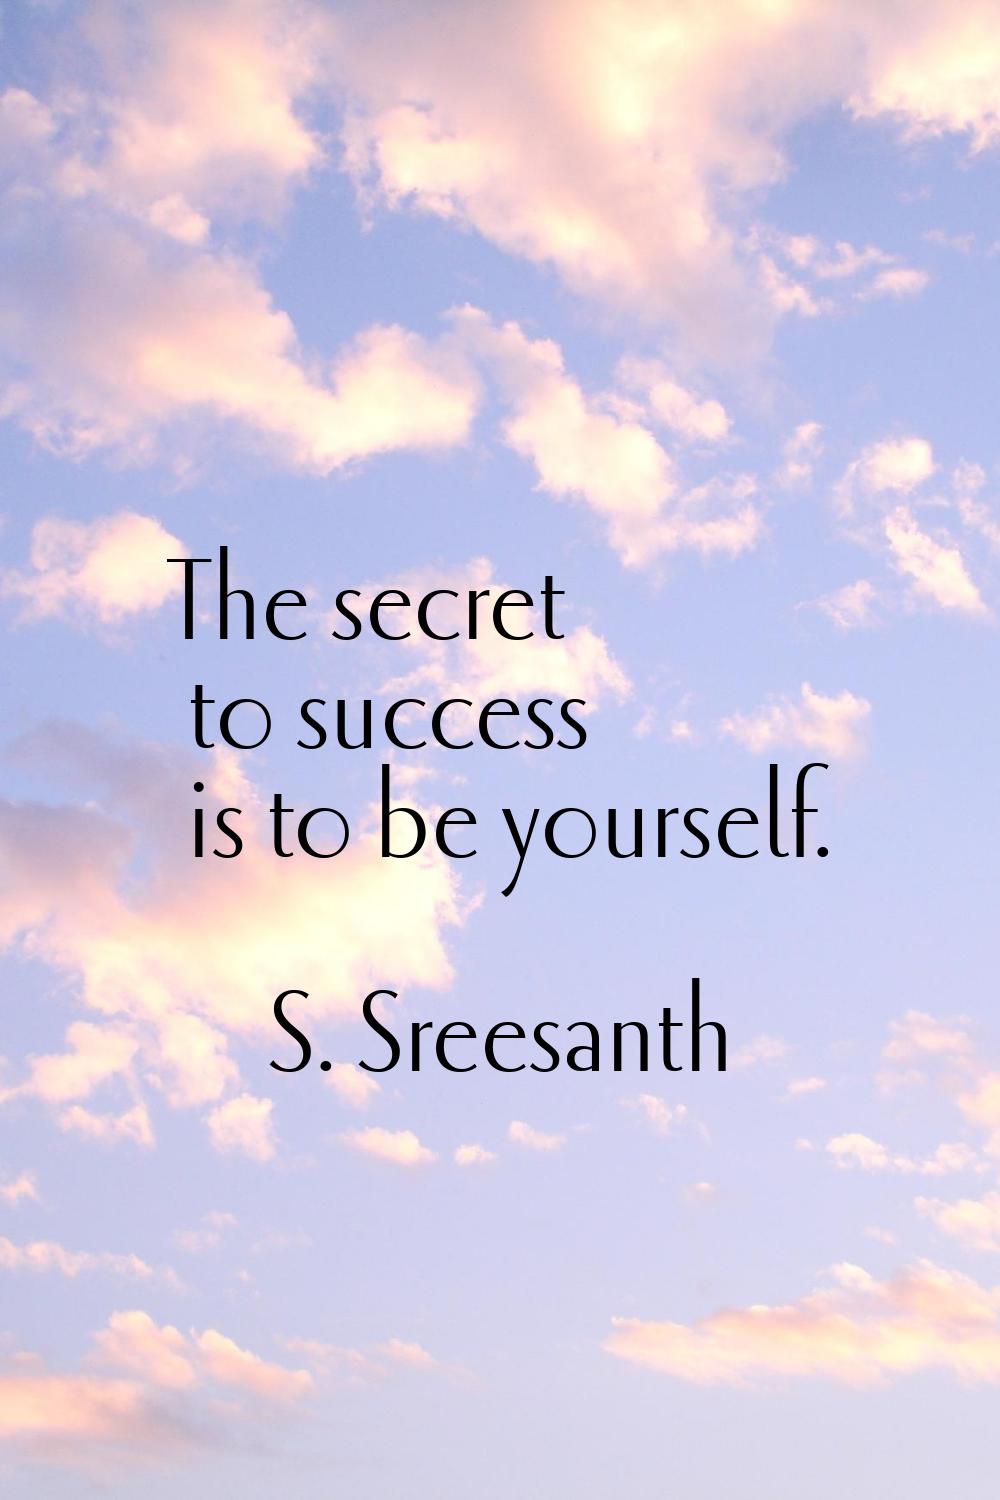 The secret to success is to be yourself.